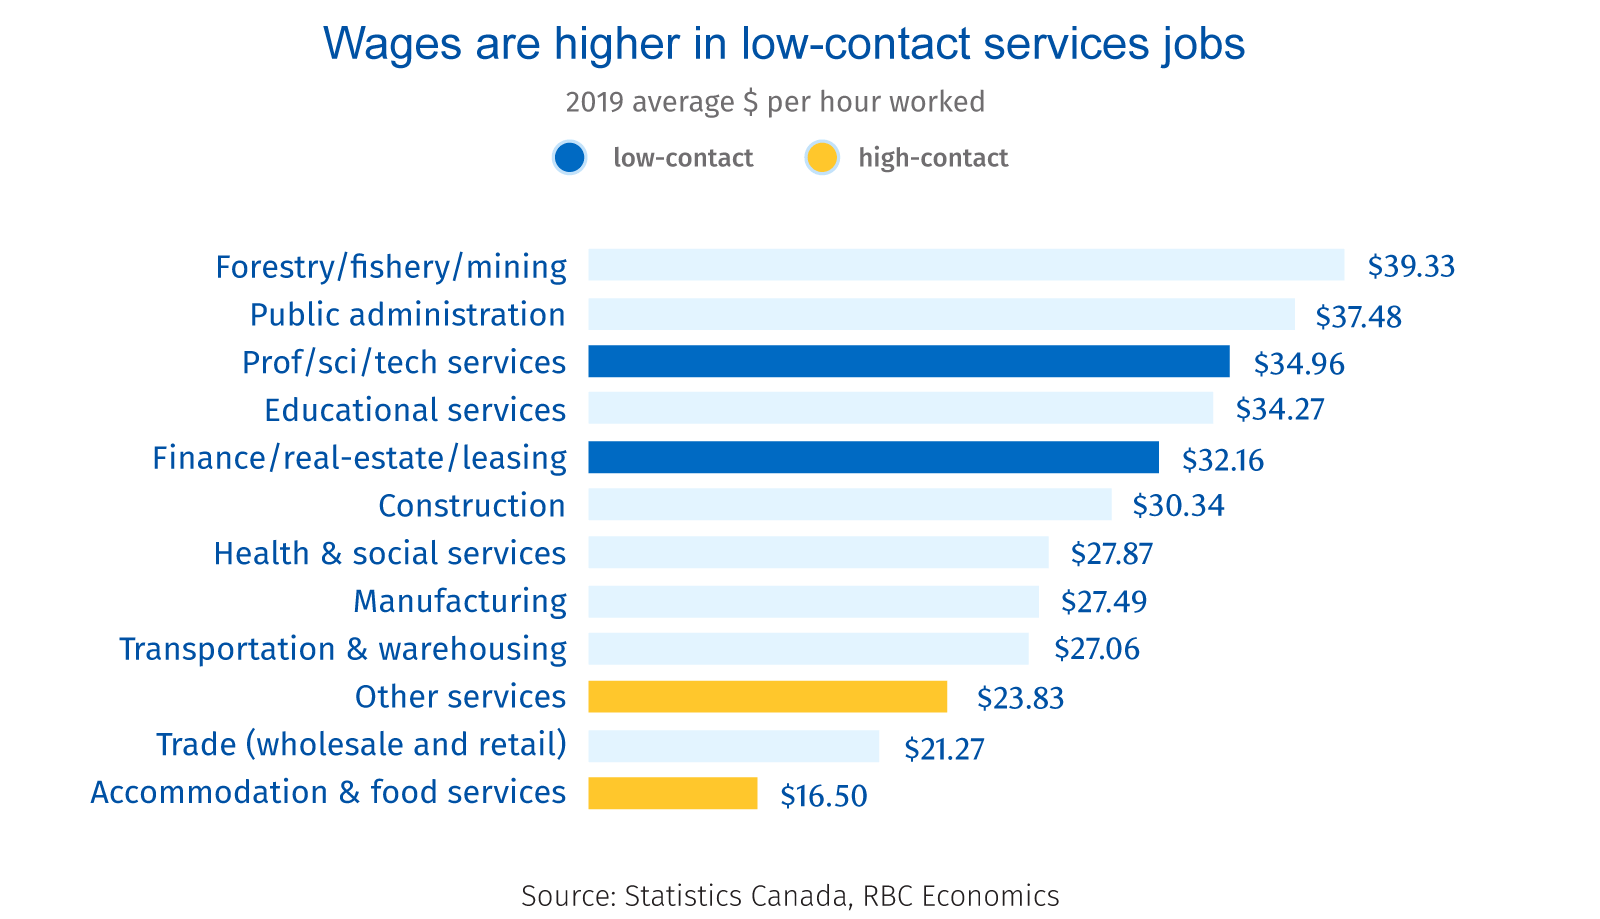 Image of wages being higher in low contact services jobs, Source: Statistics Canada, RBC Economics